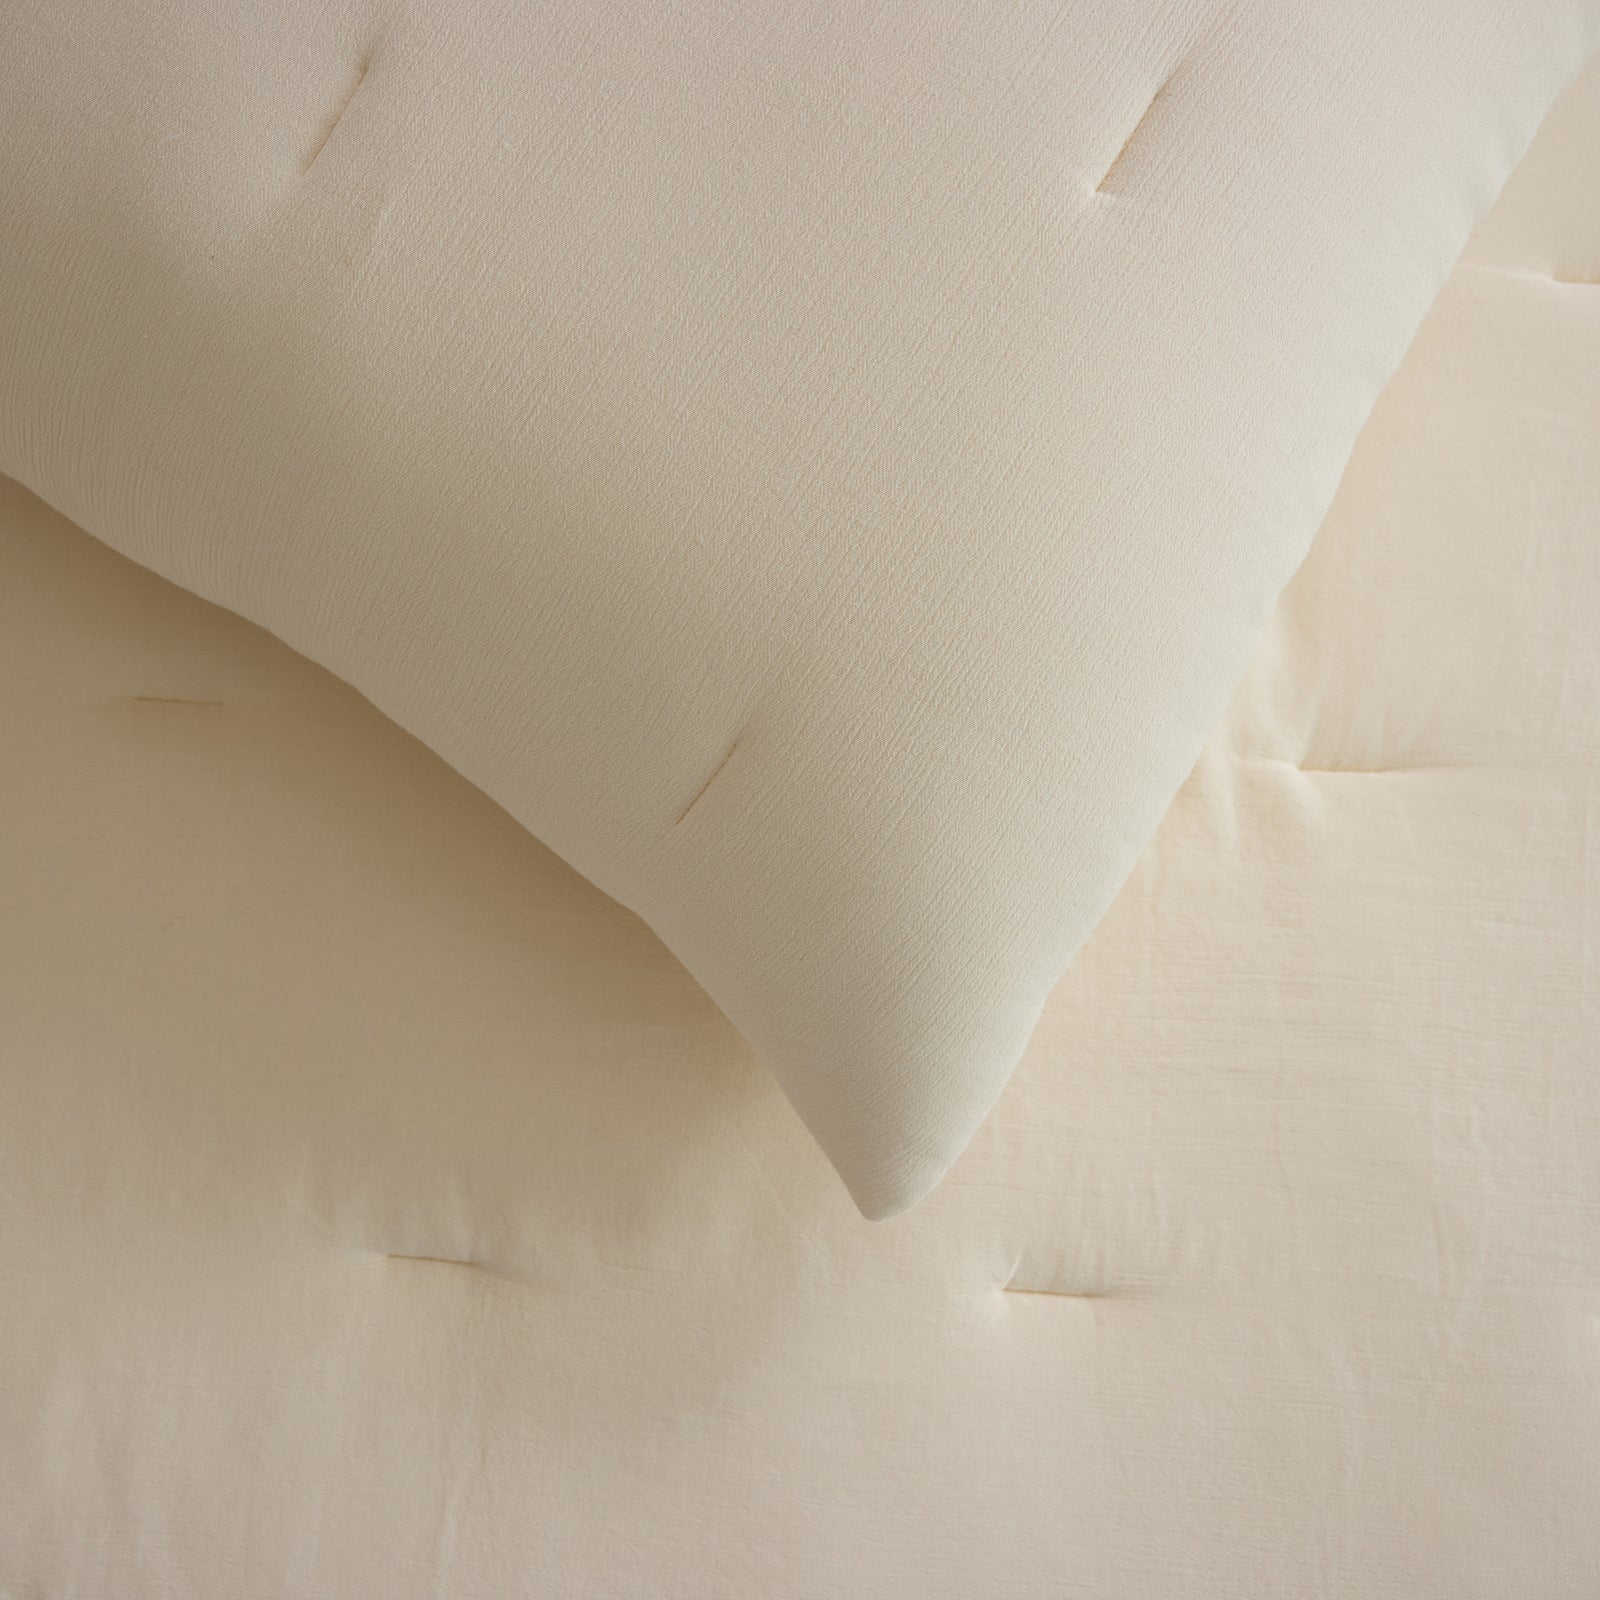 Close up of Buttermilk Aire Bamboo Puckered Shams. The shams are resting on a bed in a bedroom